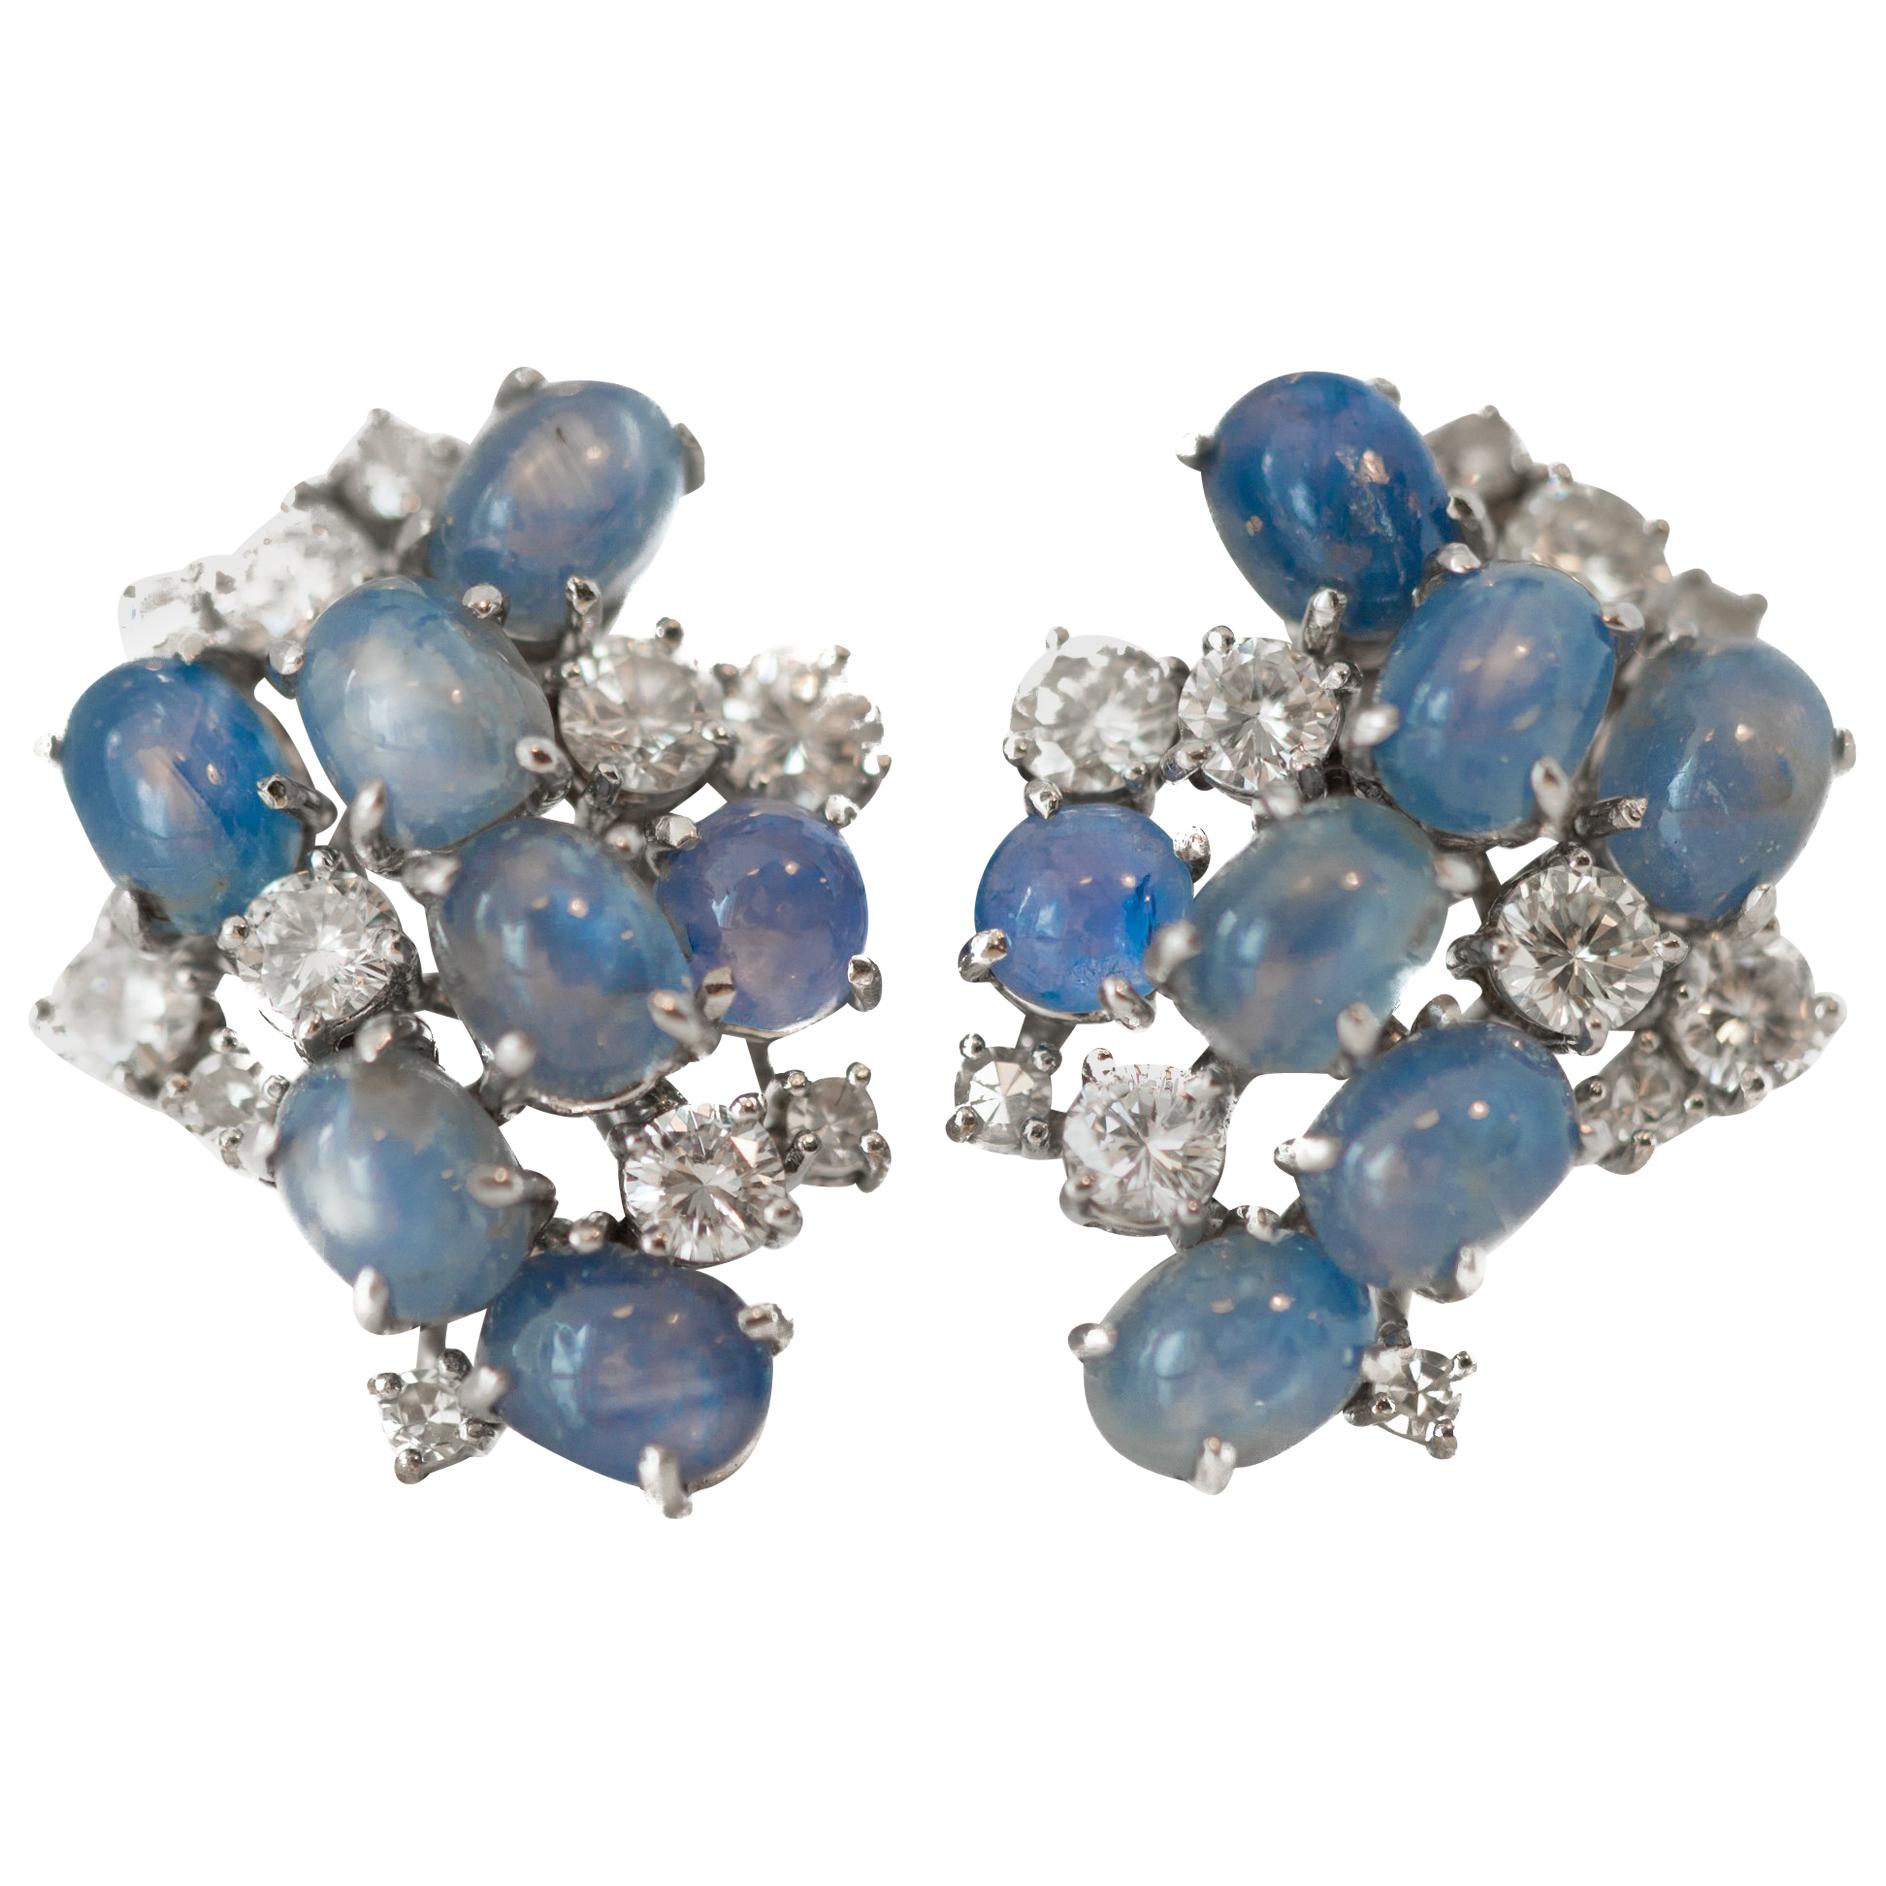 1950s 3.5 Carat Total Diamond and Sapphire Clip-On Earrings for Non Pierced Ears For Sale